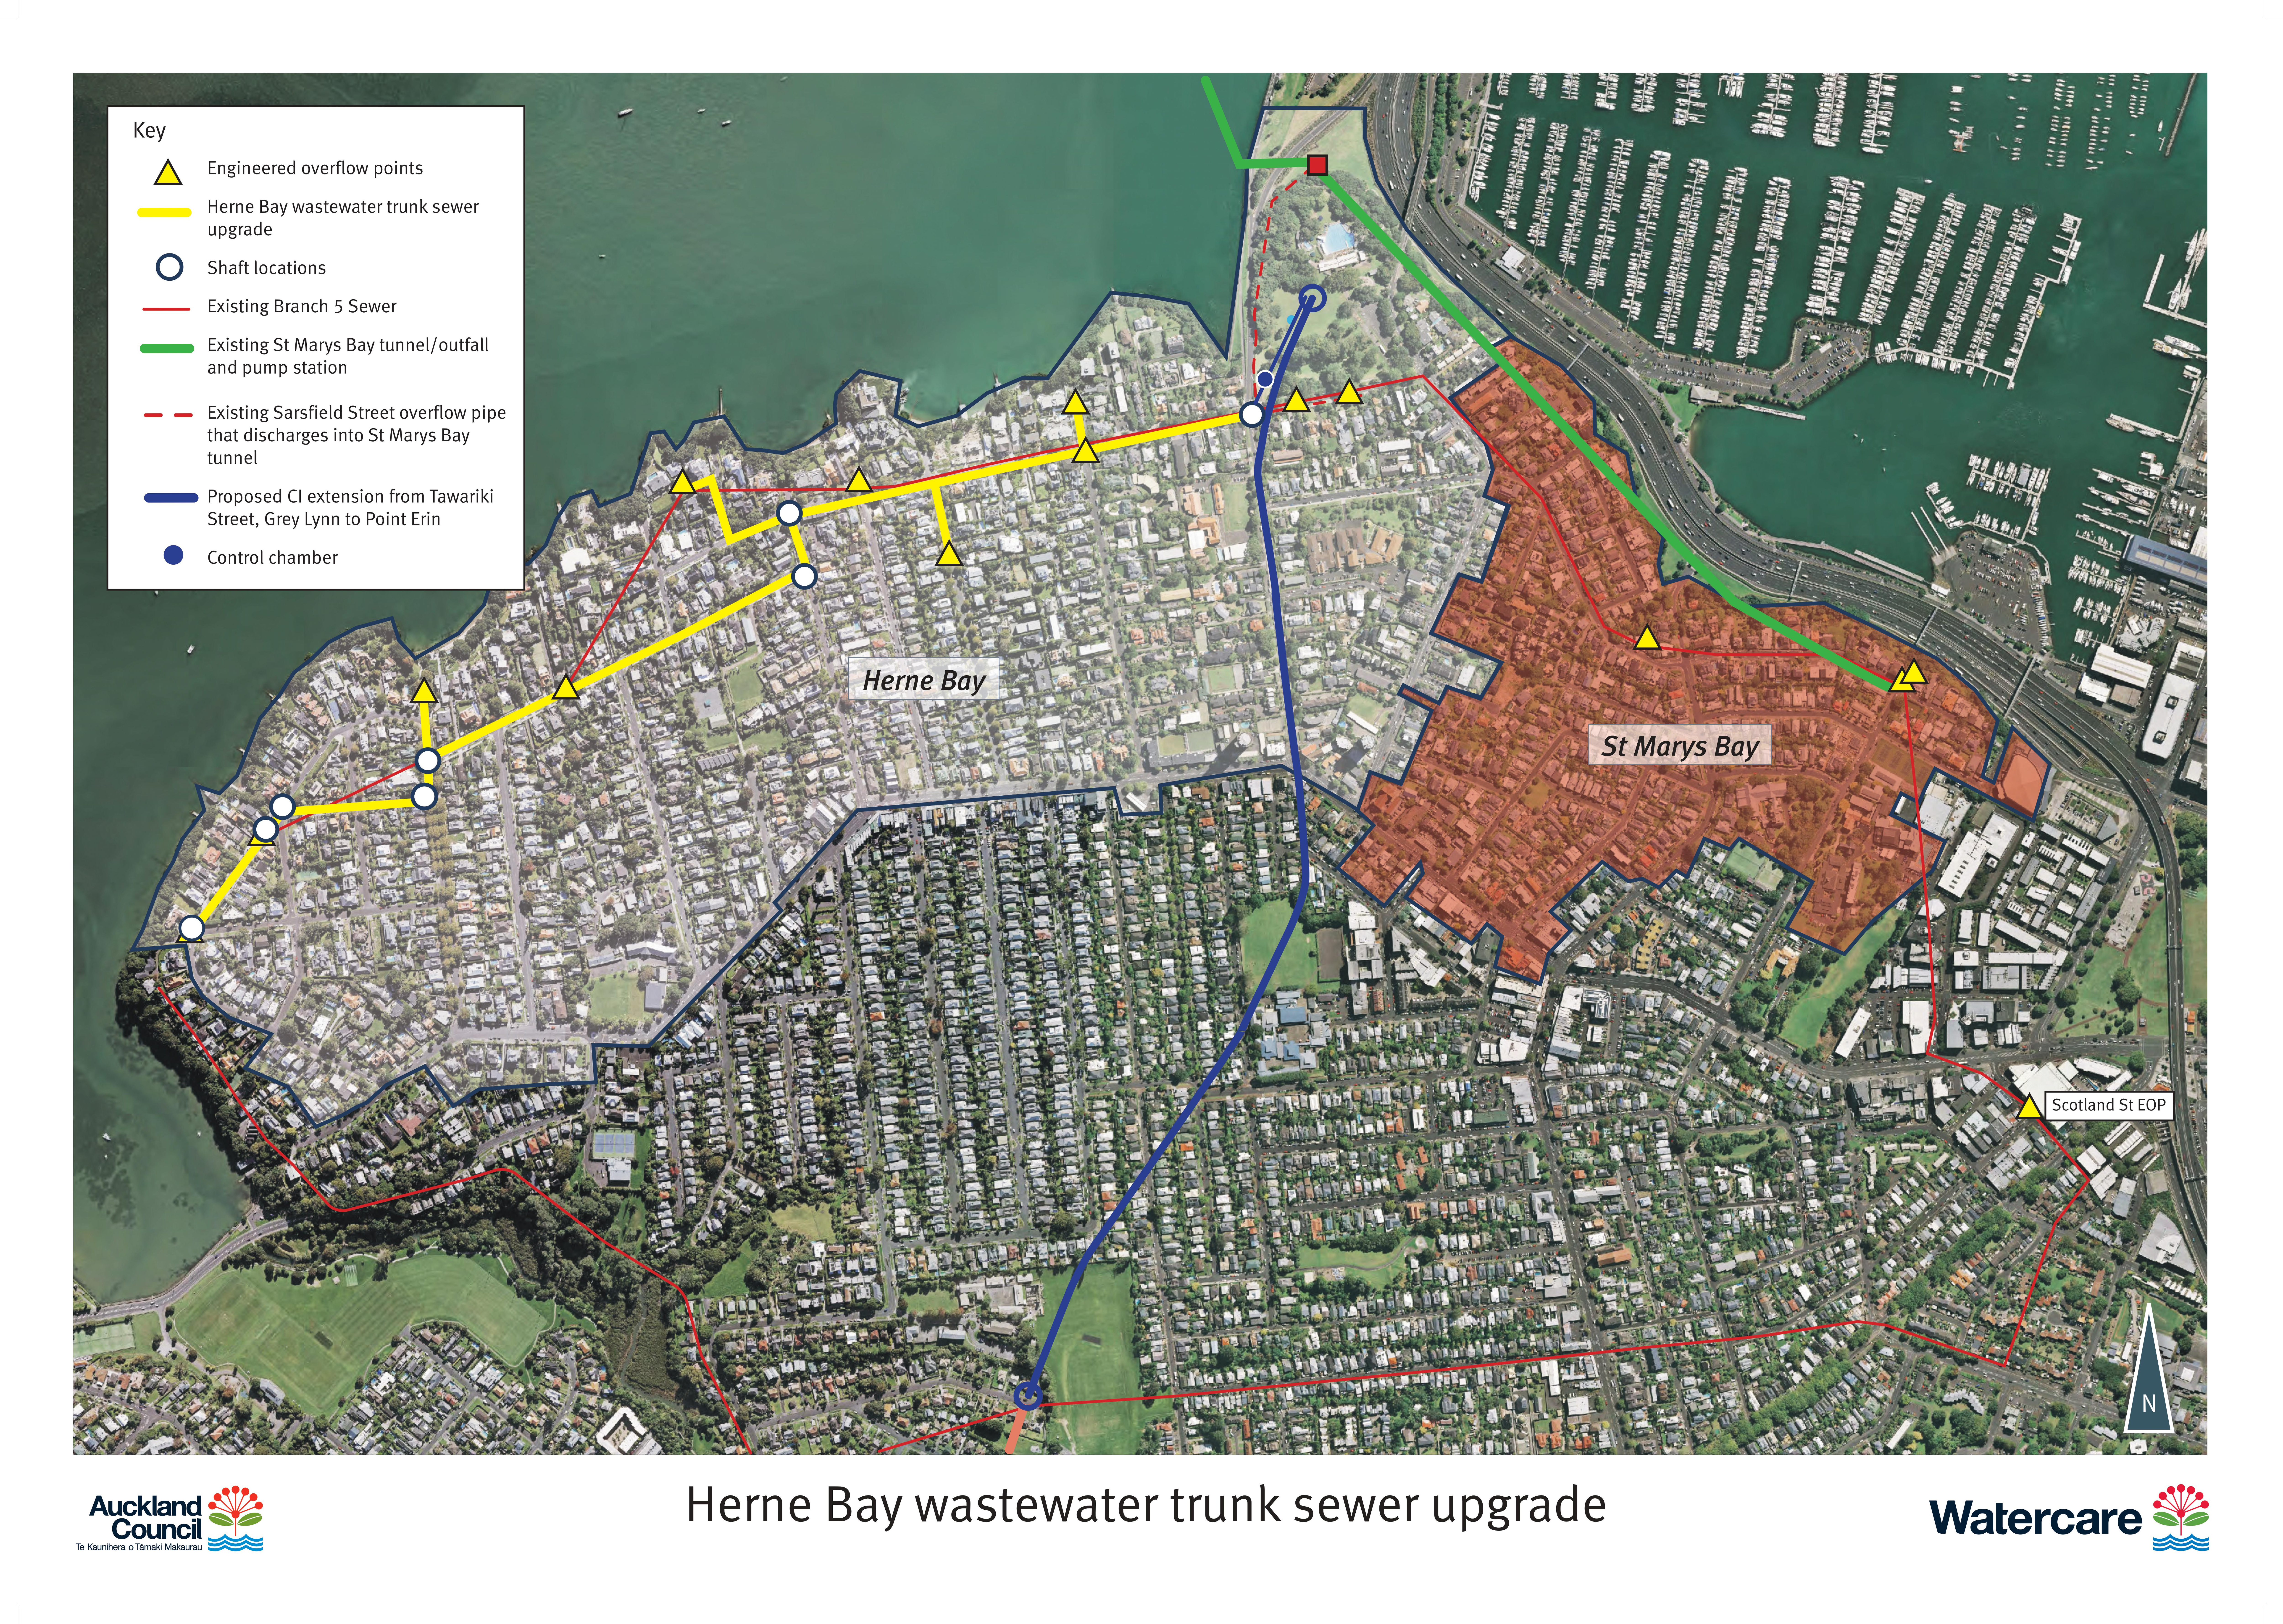 Herne Bay wastewater trunk sewer map